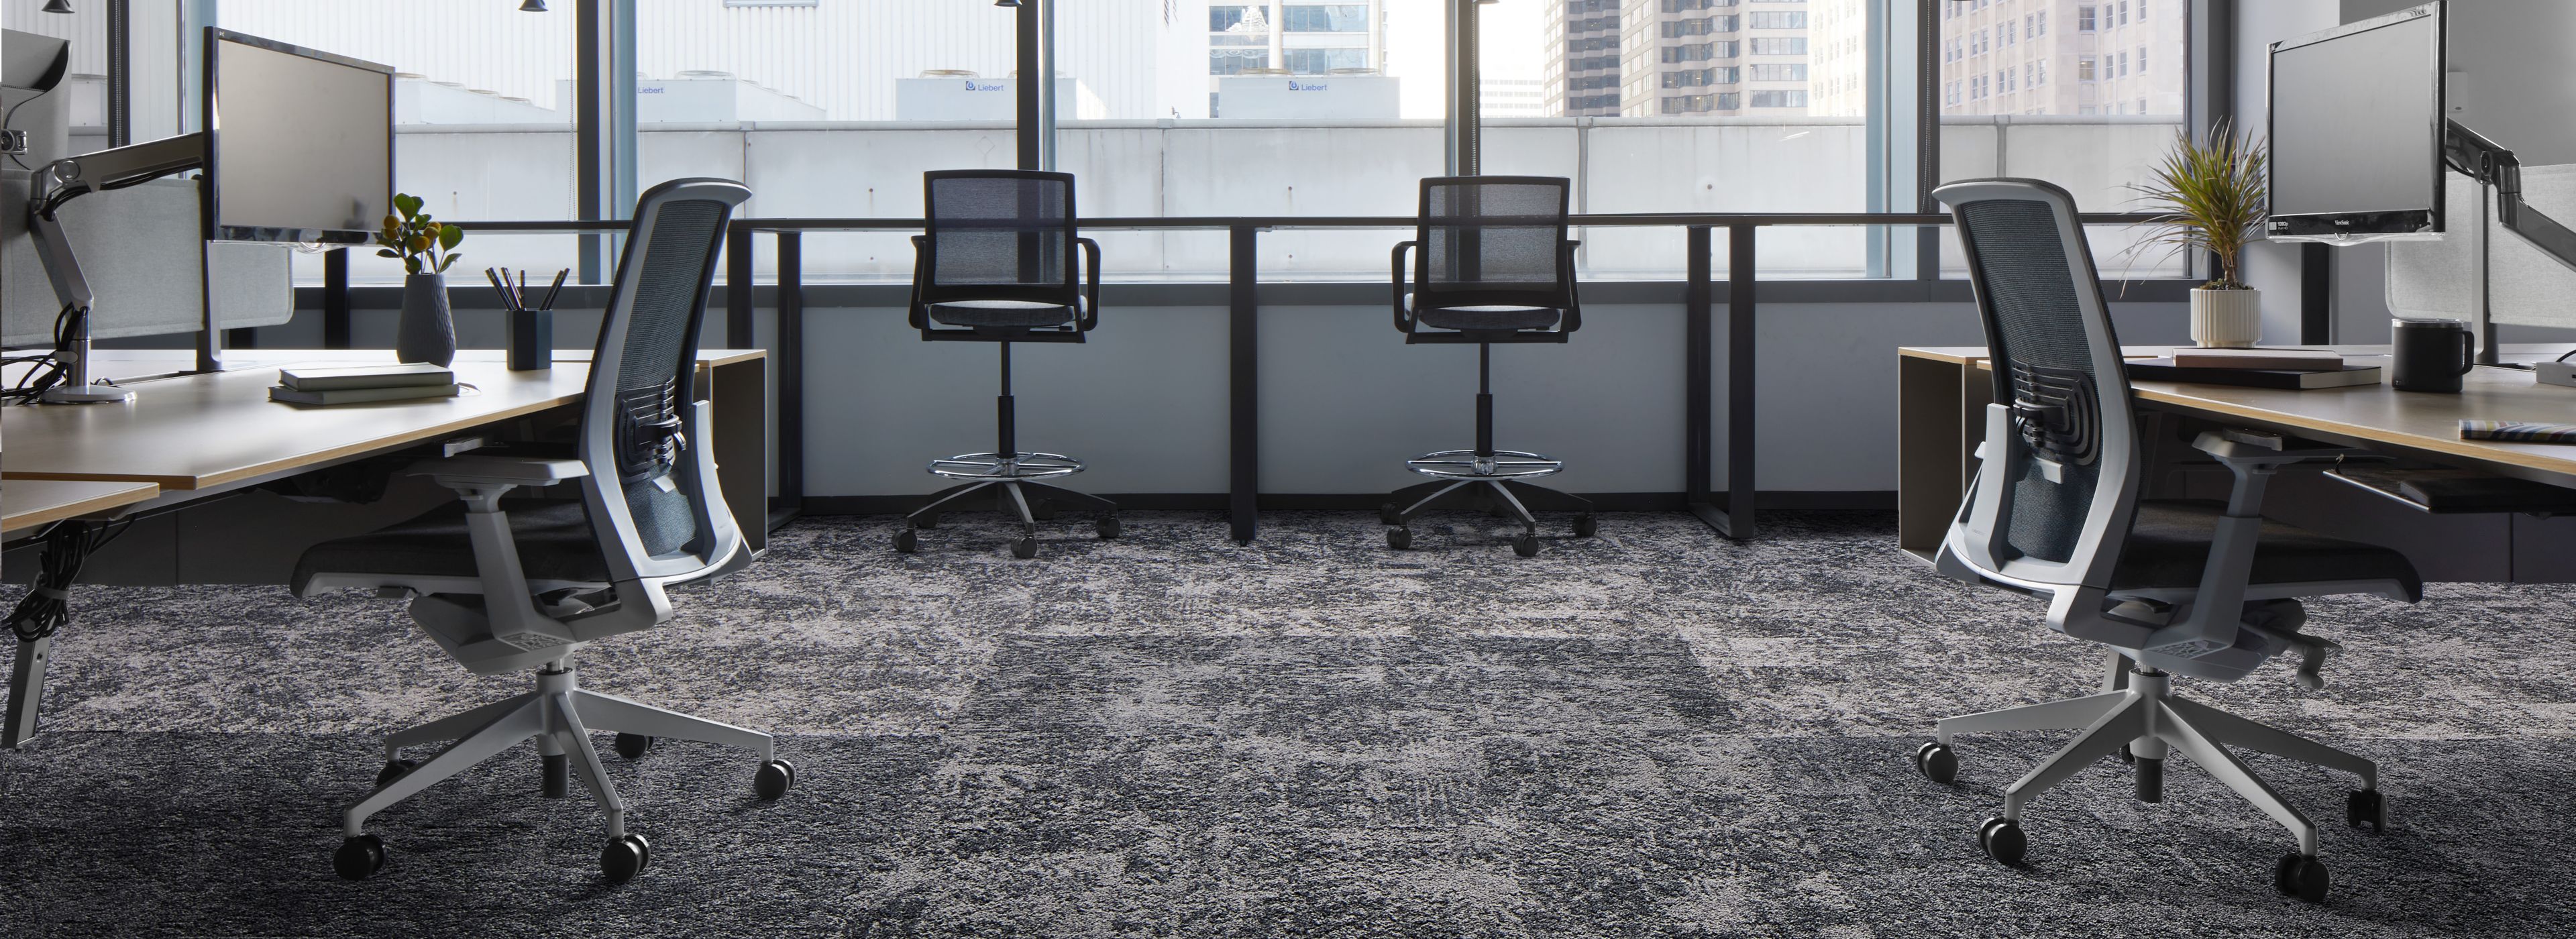 Interface Two To Tango carpet tile in office space numéro d’image 1